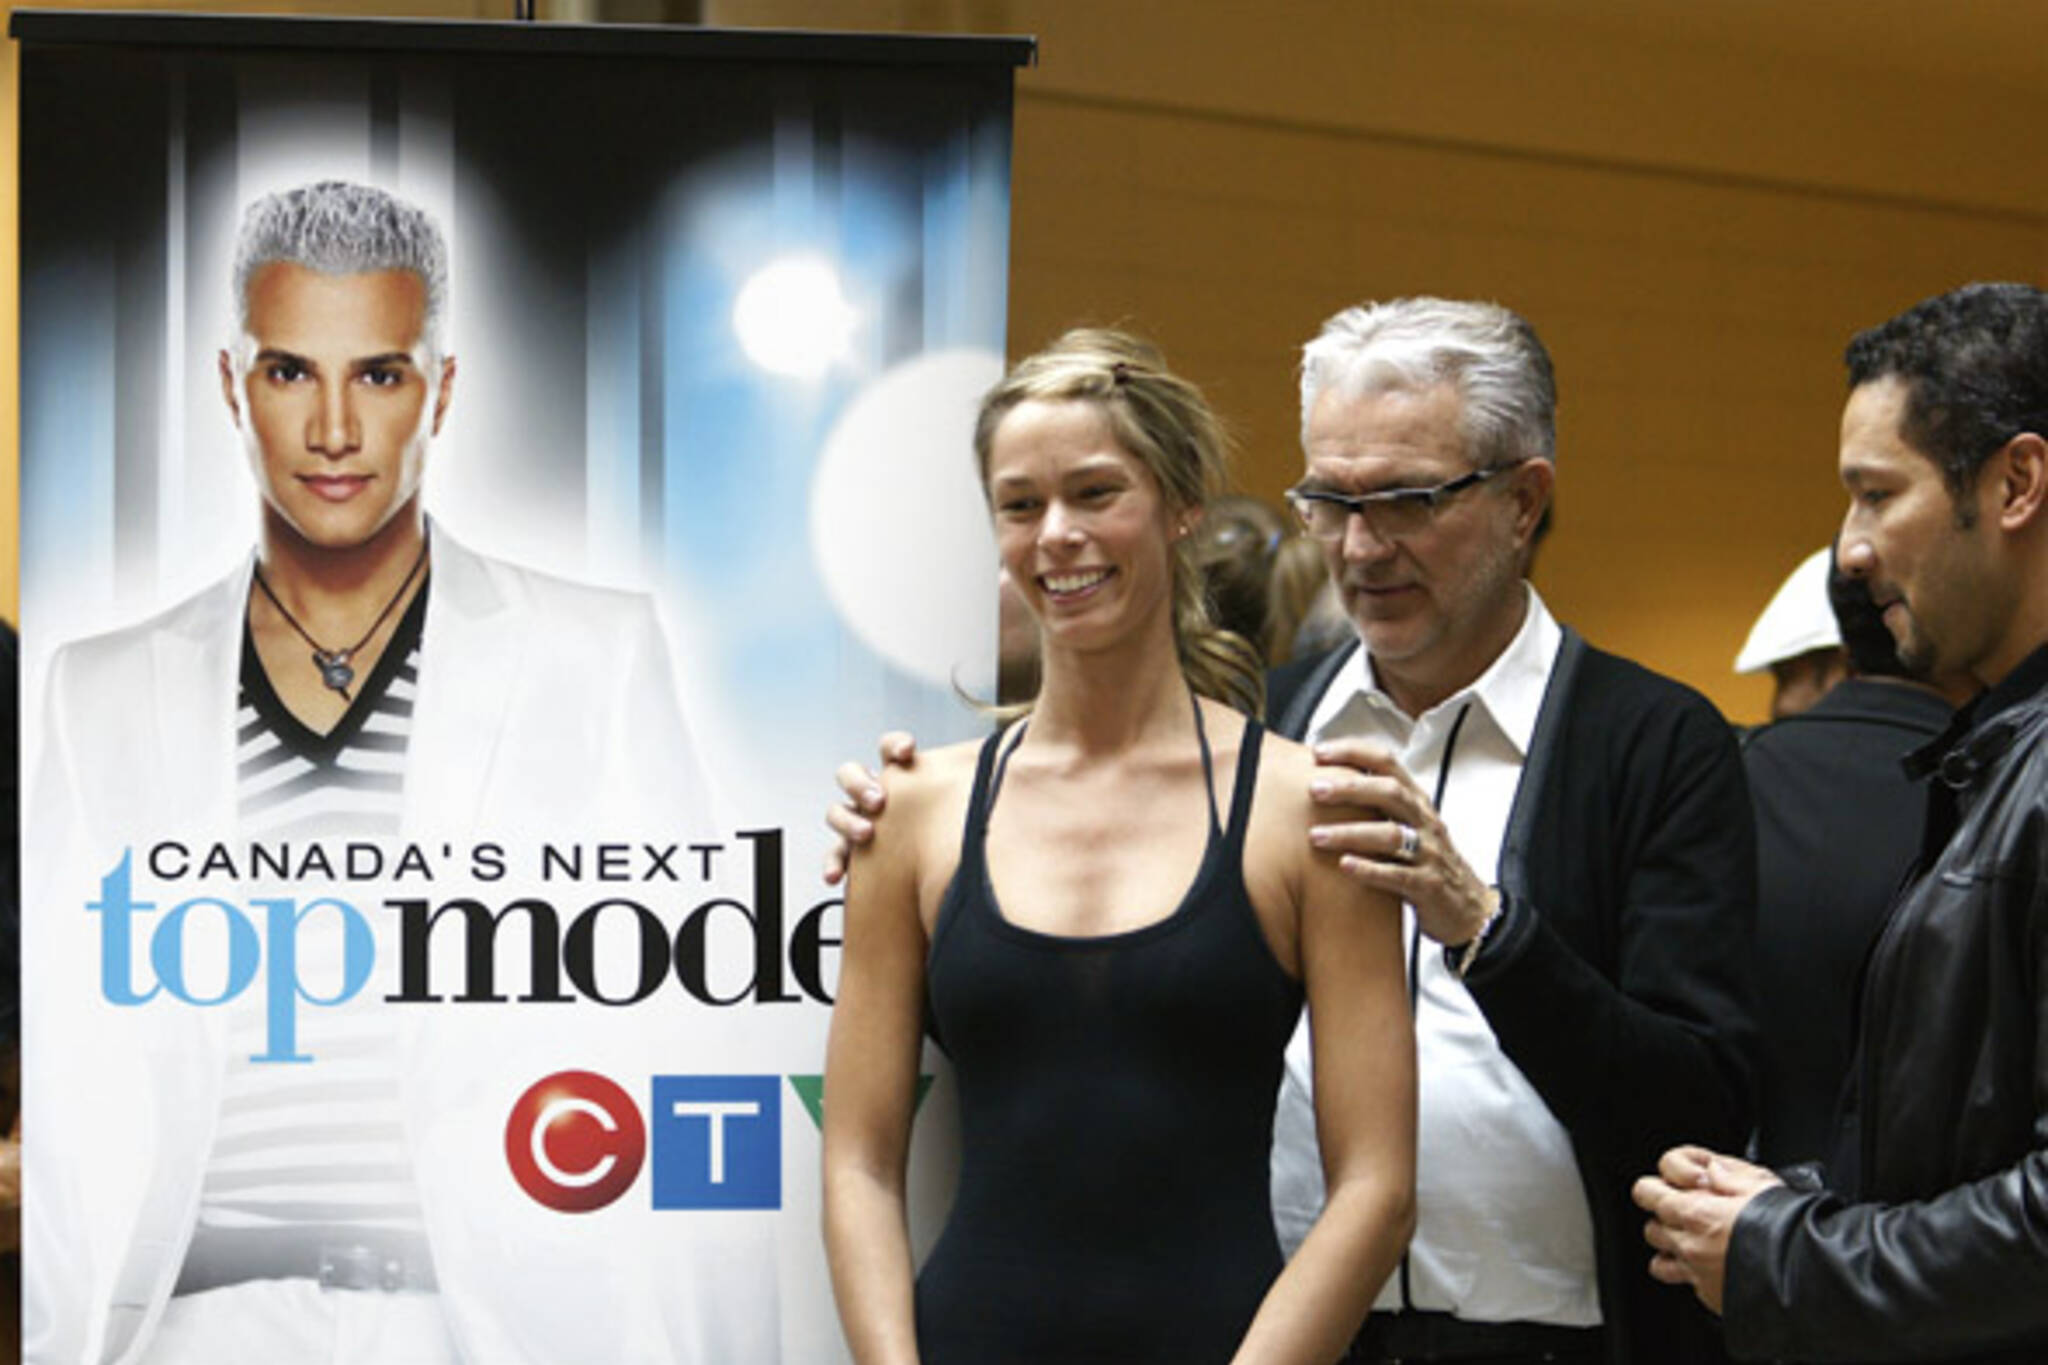 Canada's Next Top Model auditions in Toronto's Fairview Mall, led by casting agent Elmer Olsen